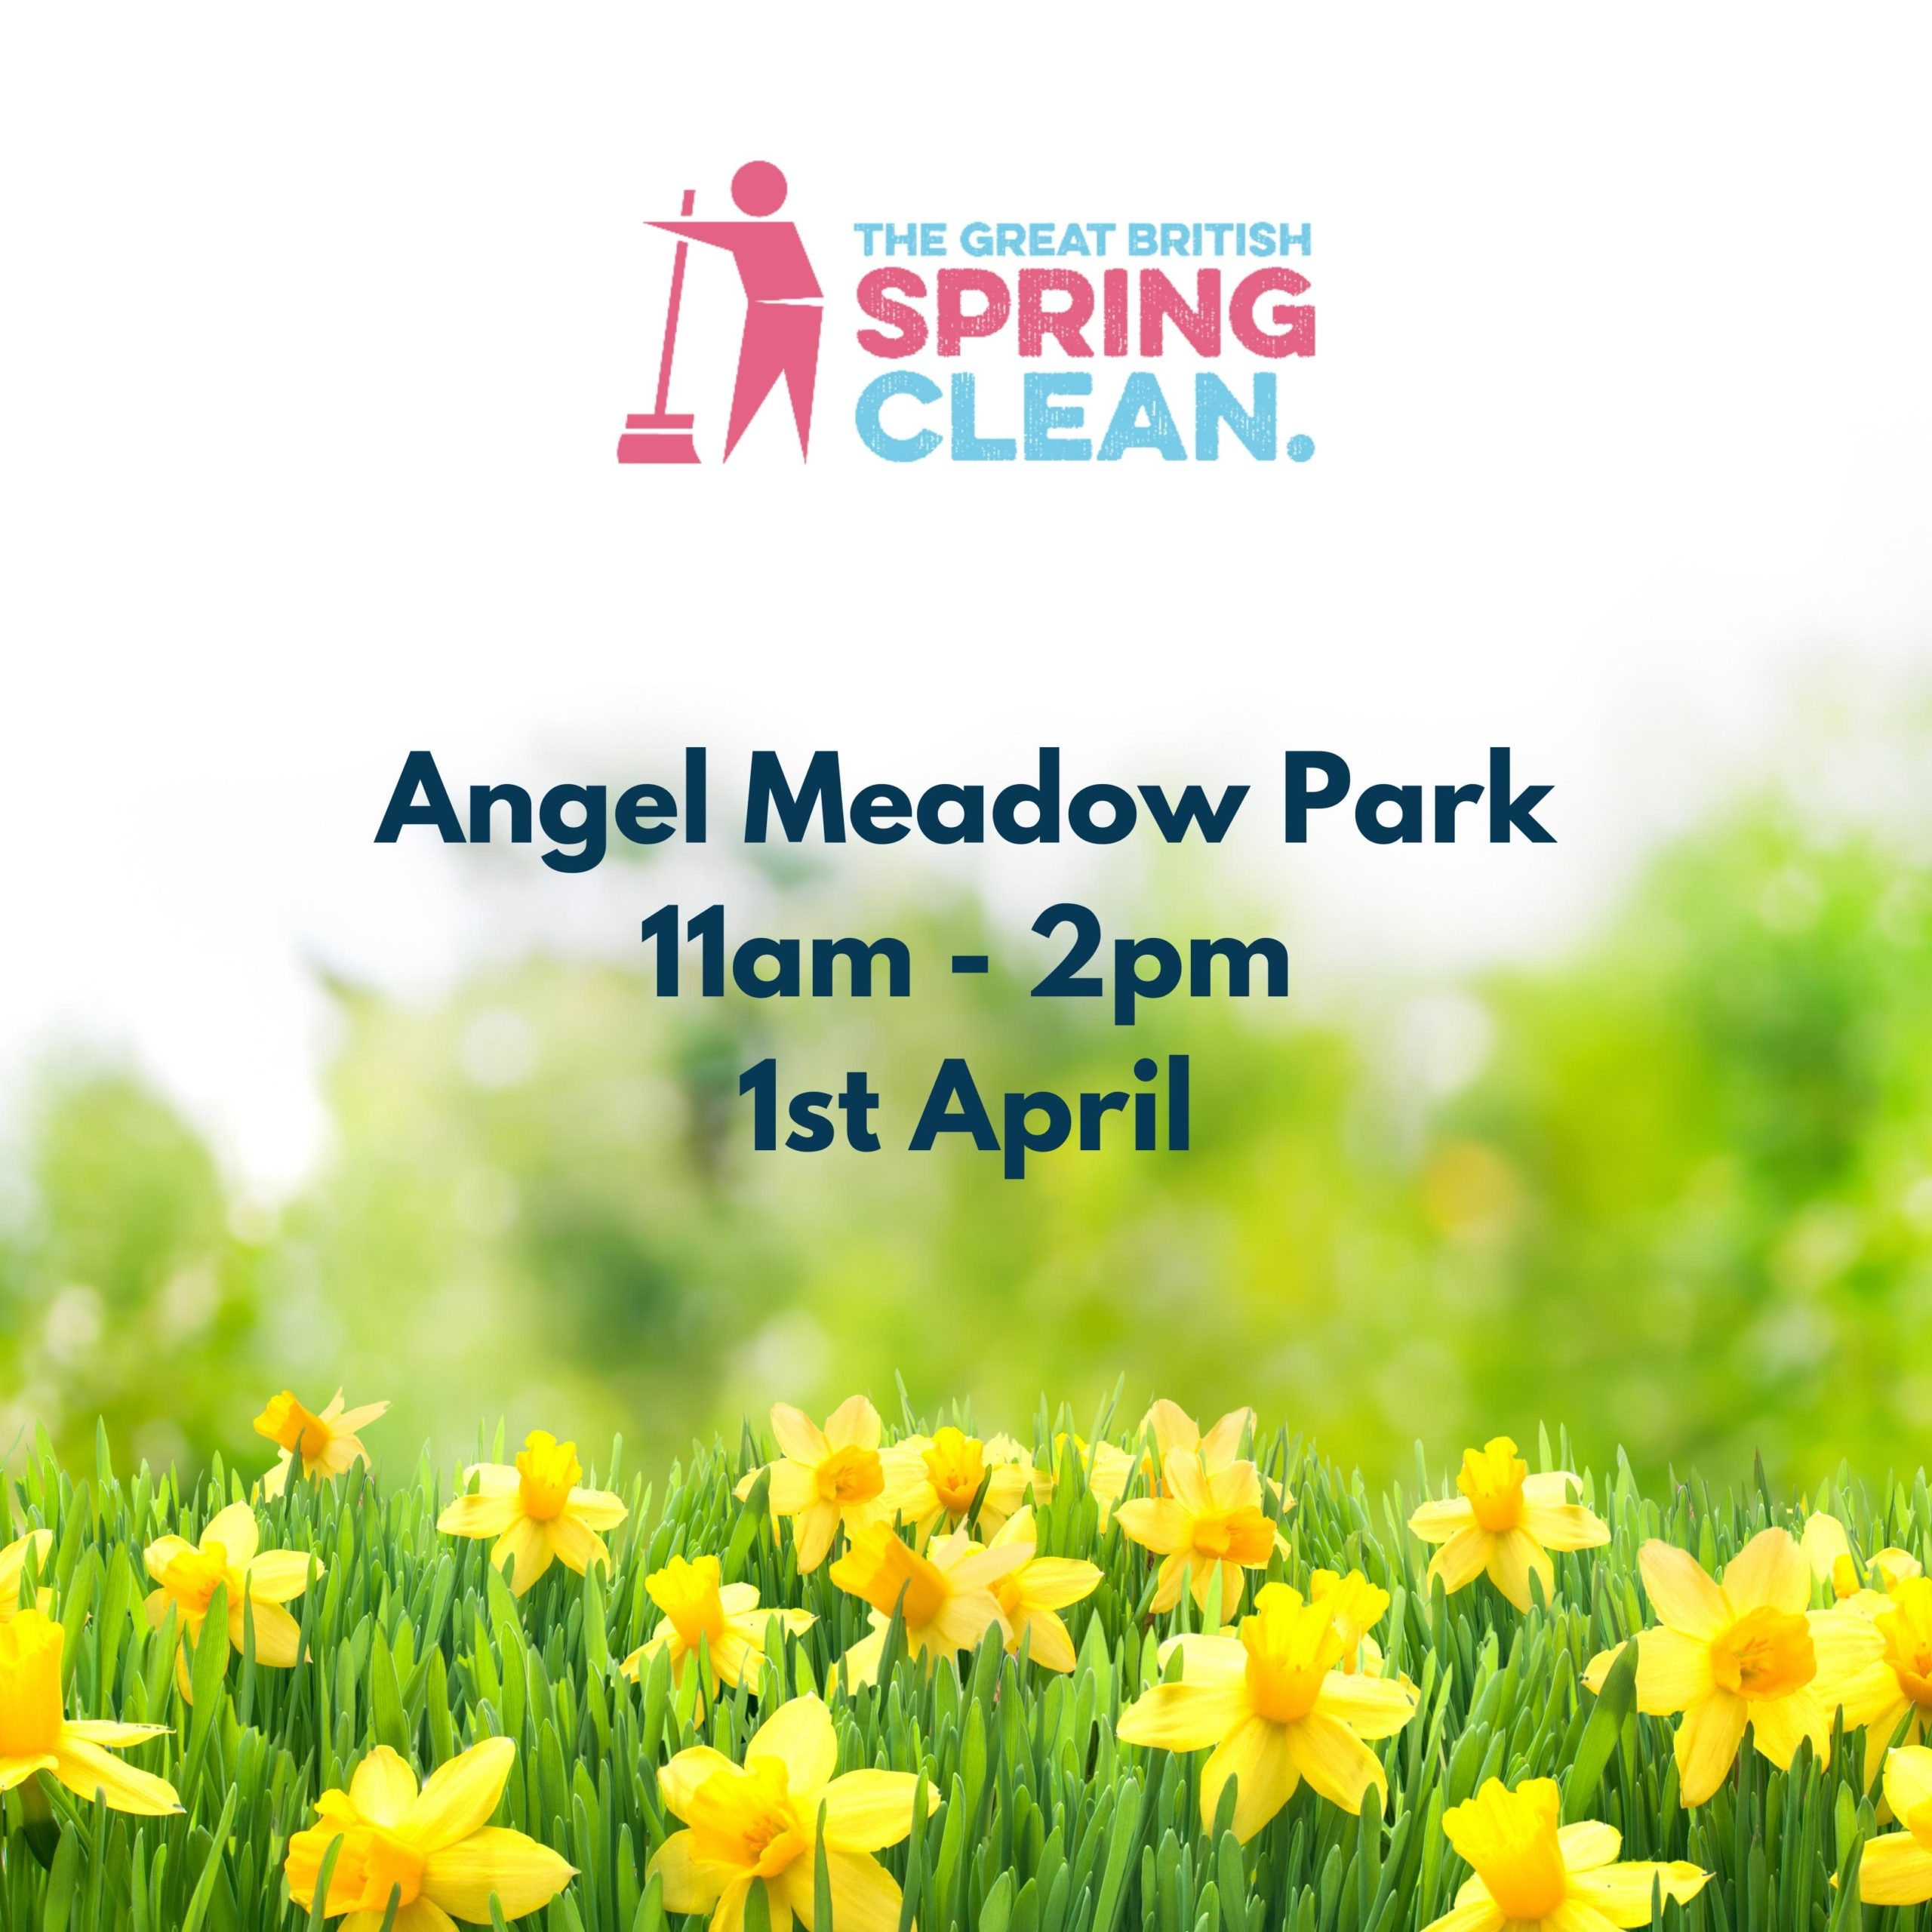 The Great British Spring Clean: Angel Meadow Park